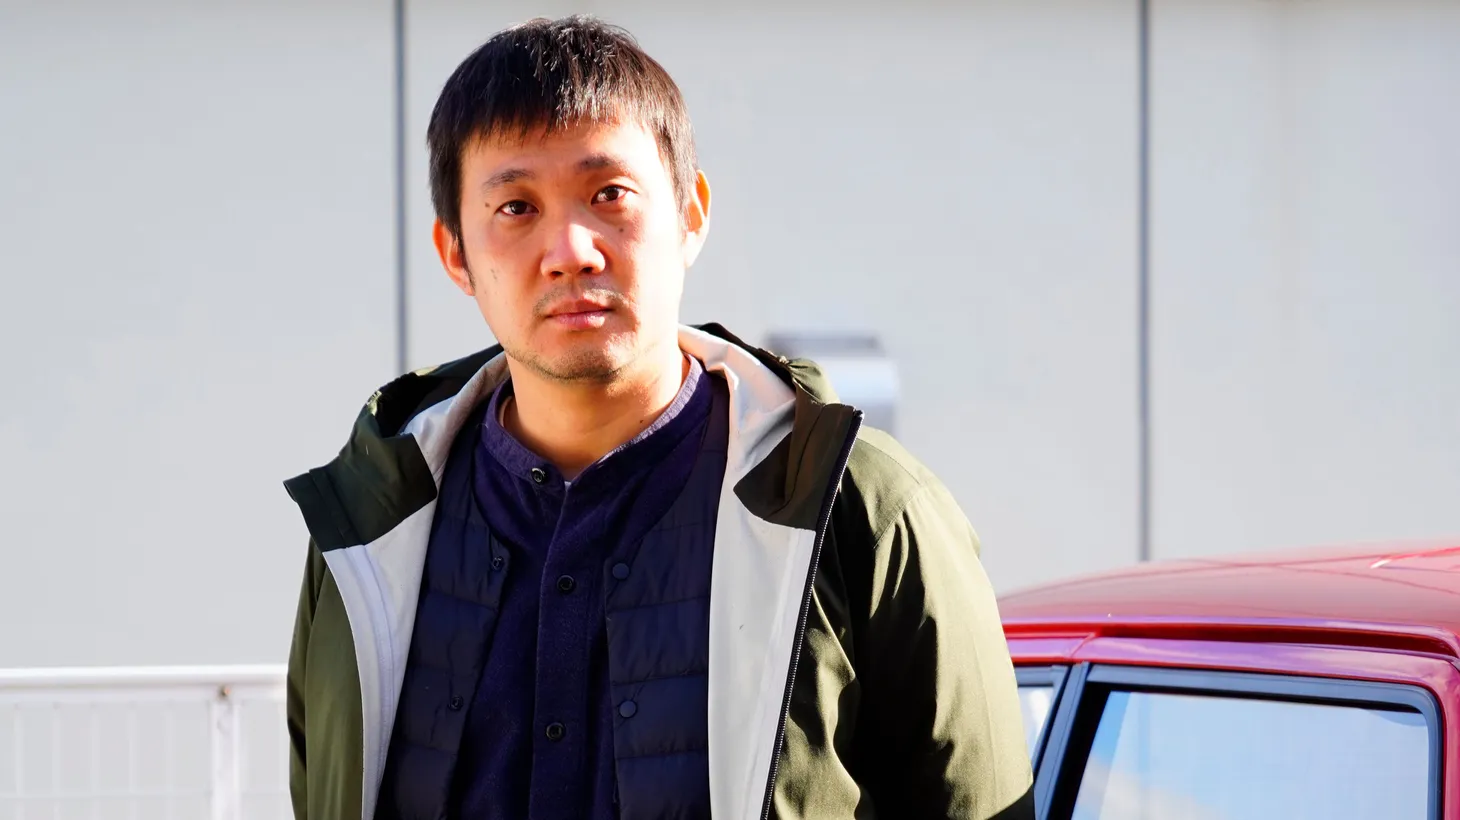 Director Ryusuke Hamaguchi has made history with “Drive My Car,” the first Japanese film to ever be nominated for an Oscar for Best Picture.